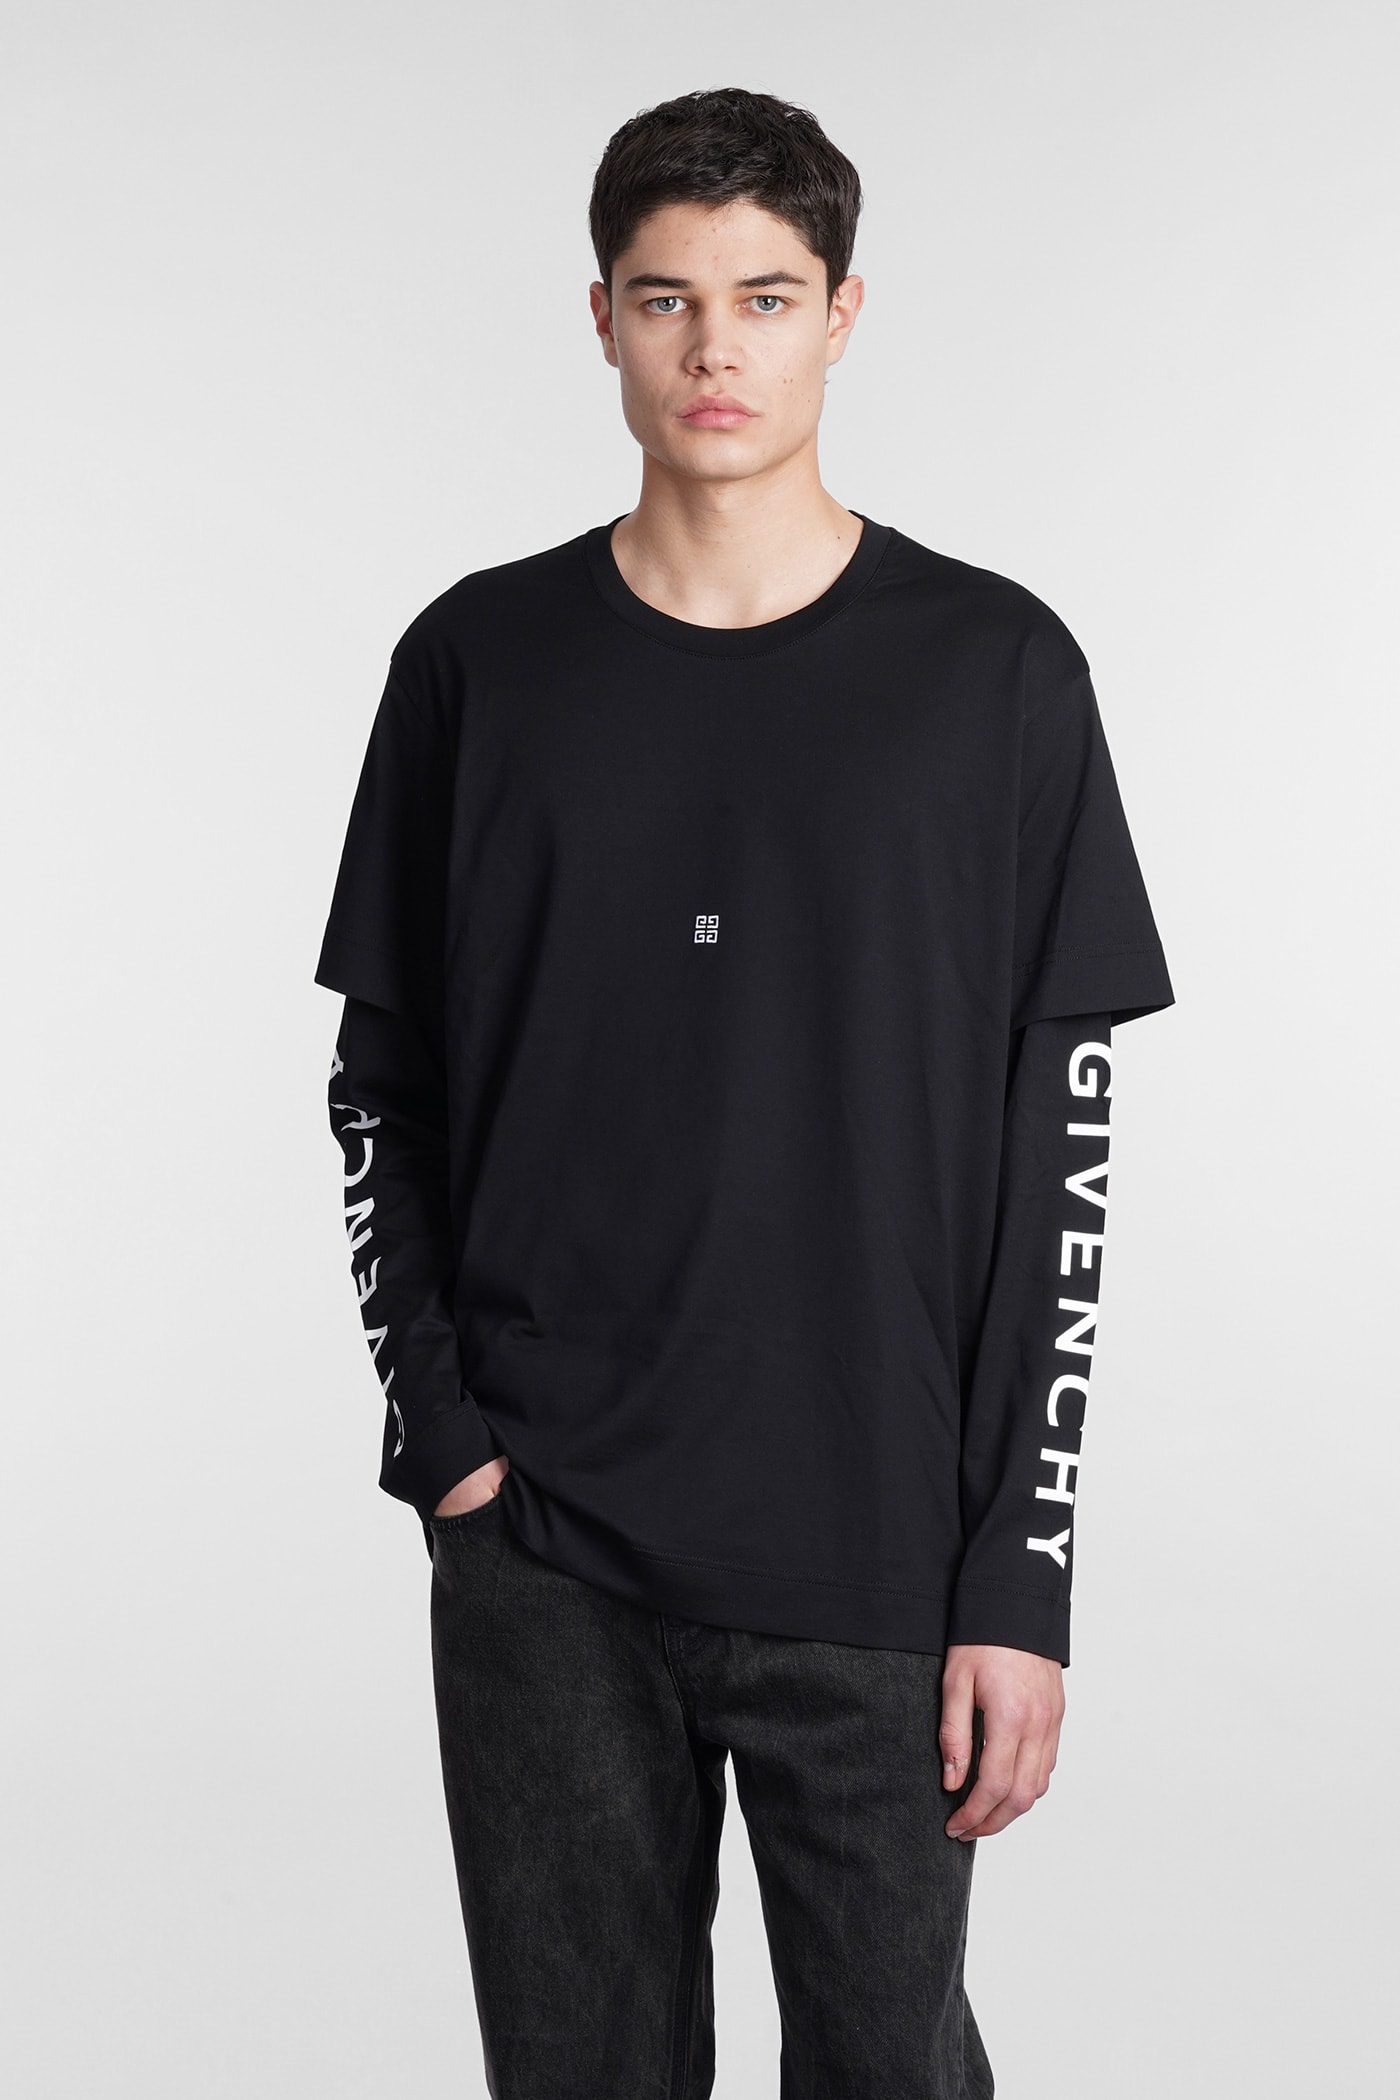 Givenchy T-shirt In Black Cotton